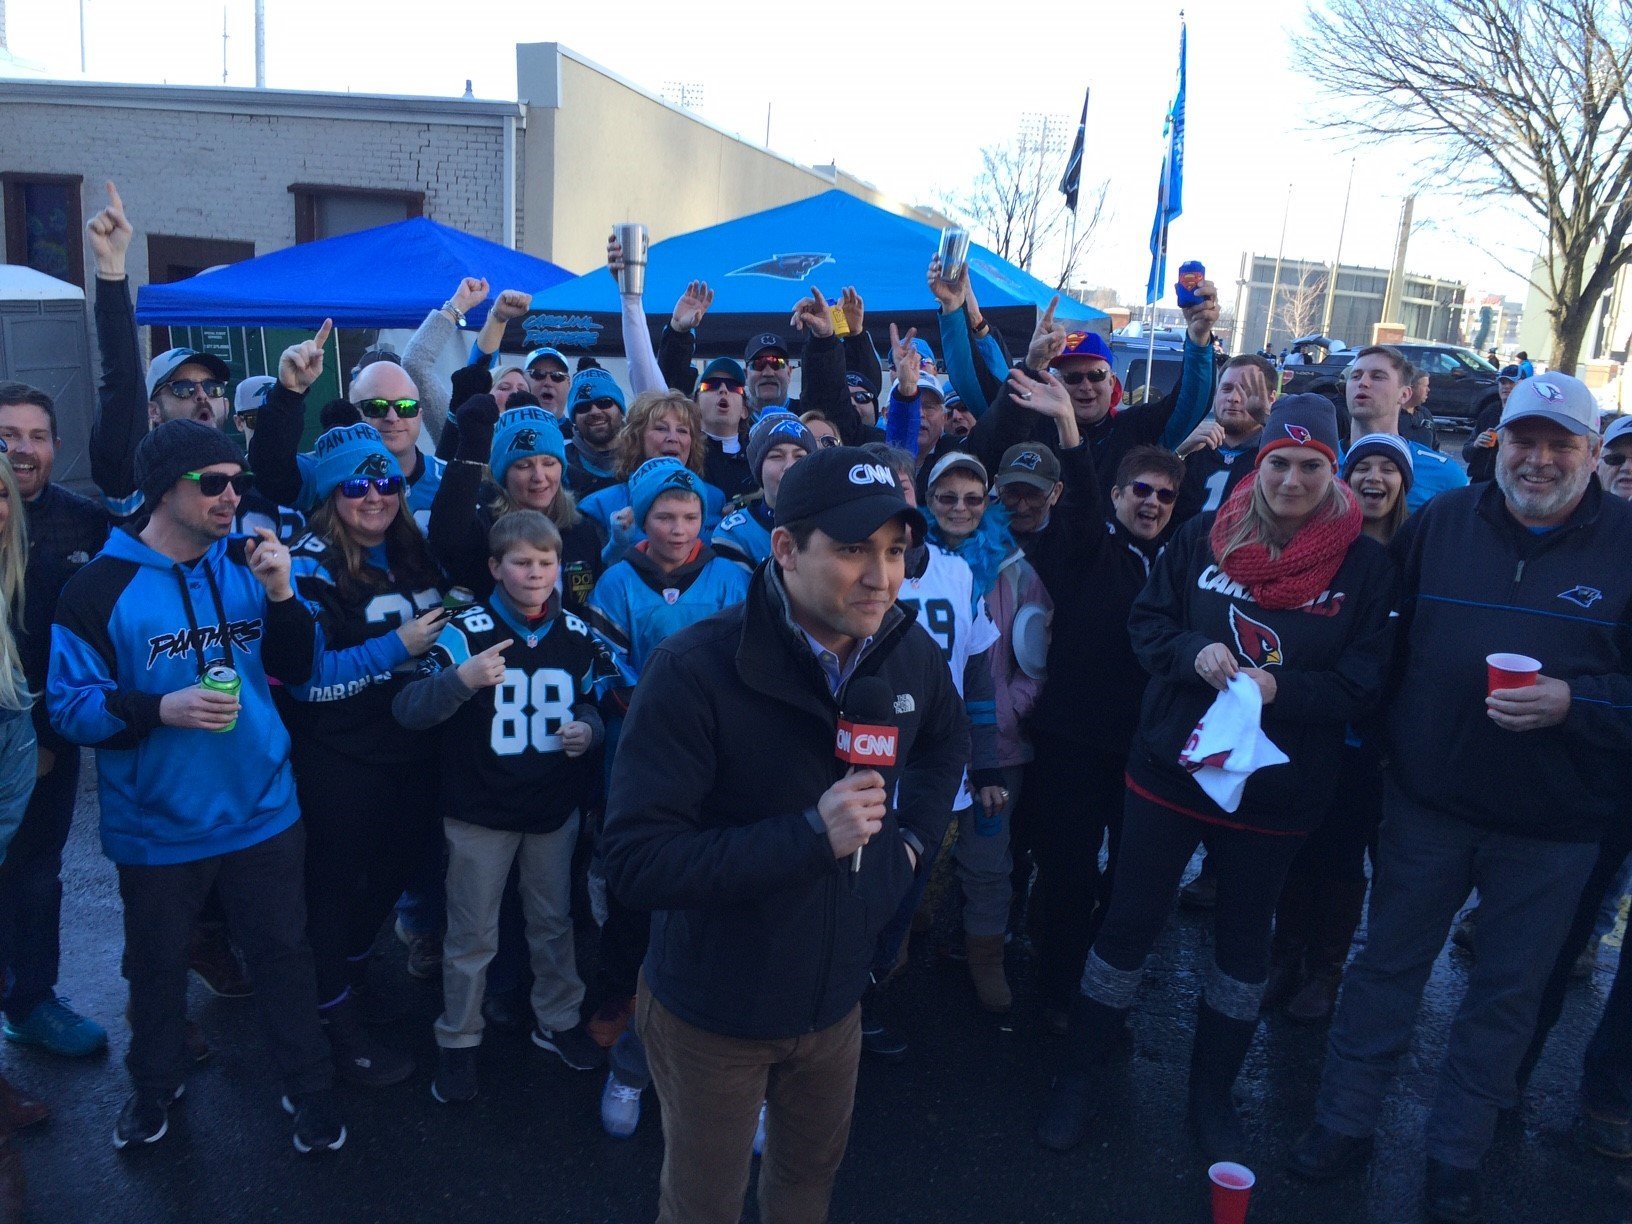 Passionate fans in Charlotte, North Carolina prepare for the NFC Championship game between the Carolina Panthers and Arizona Cardinals with CNN's Polo Sandoval.